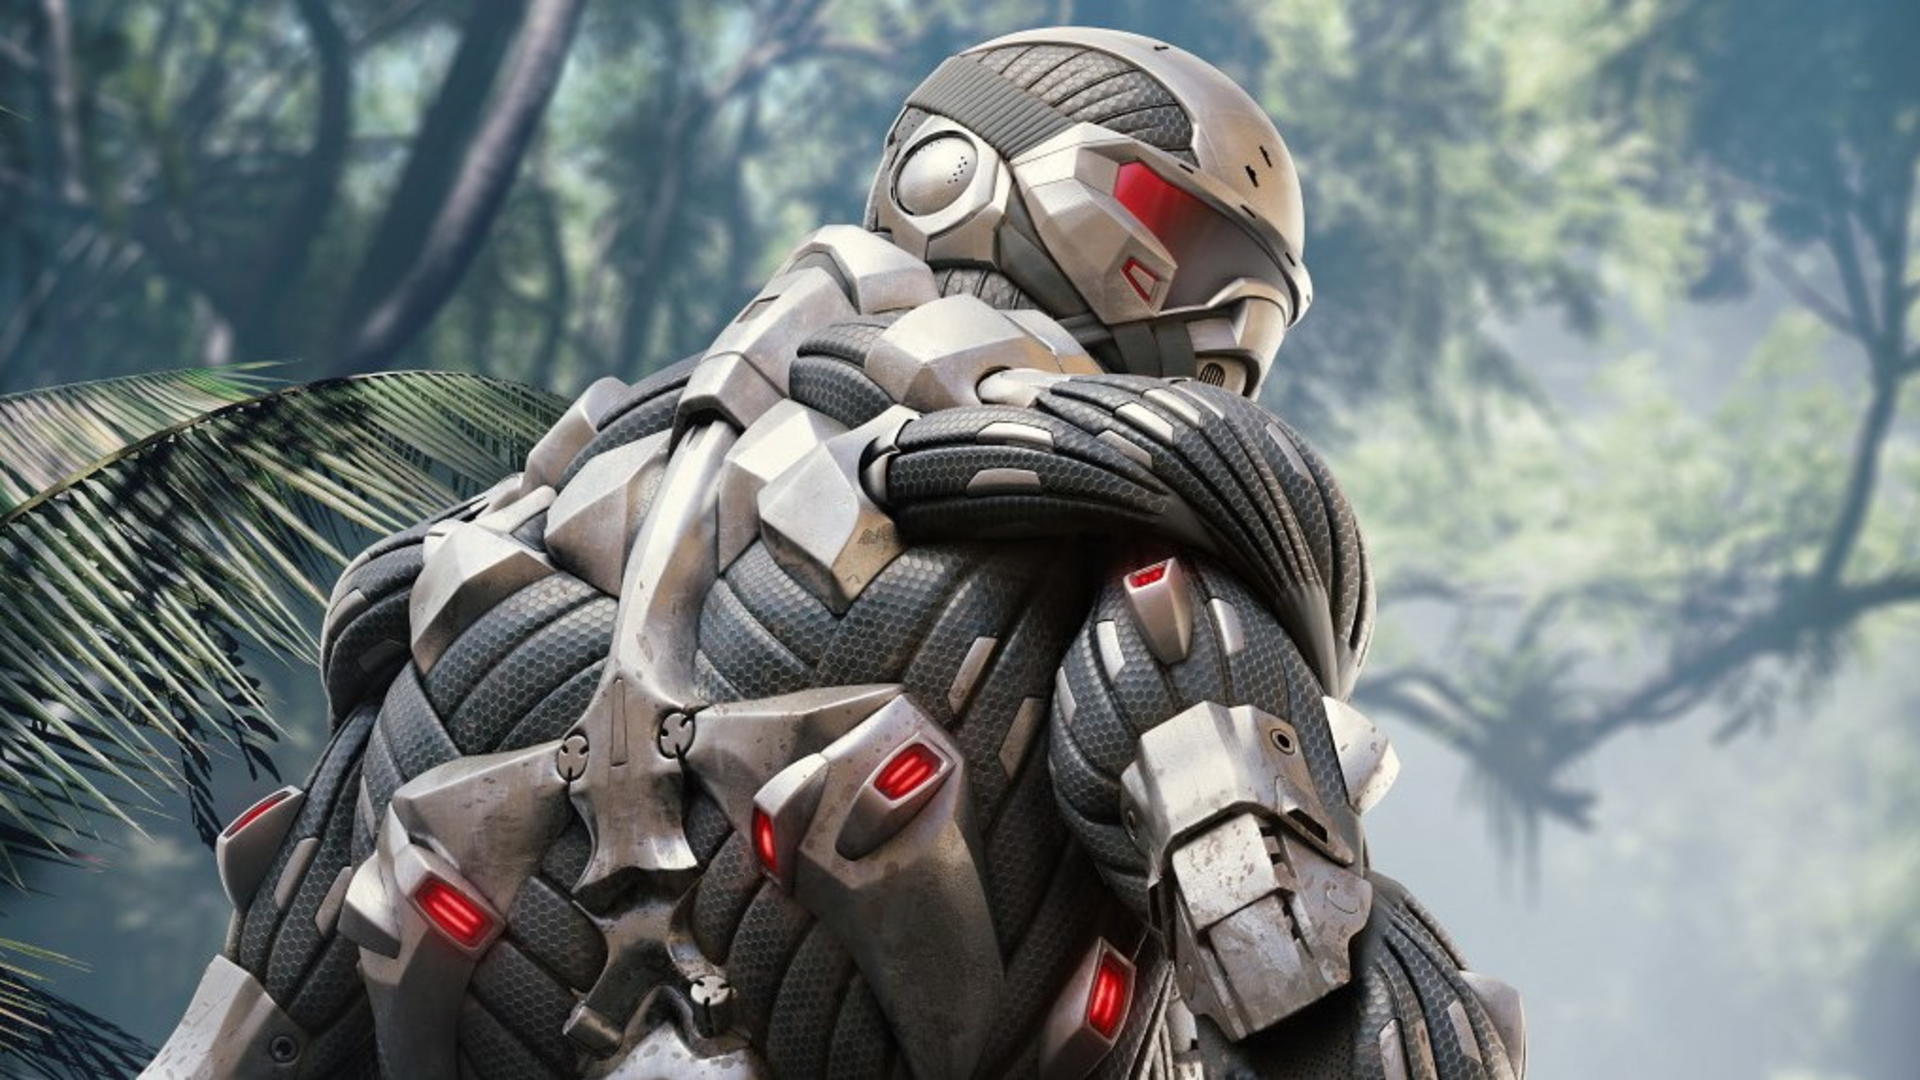 Crysis Remastered will launch September 18th. Rock Paper Shotgun